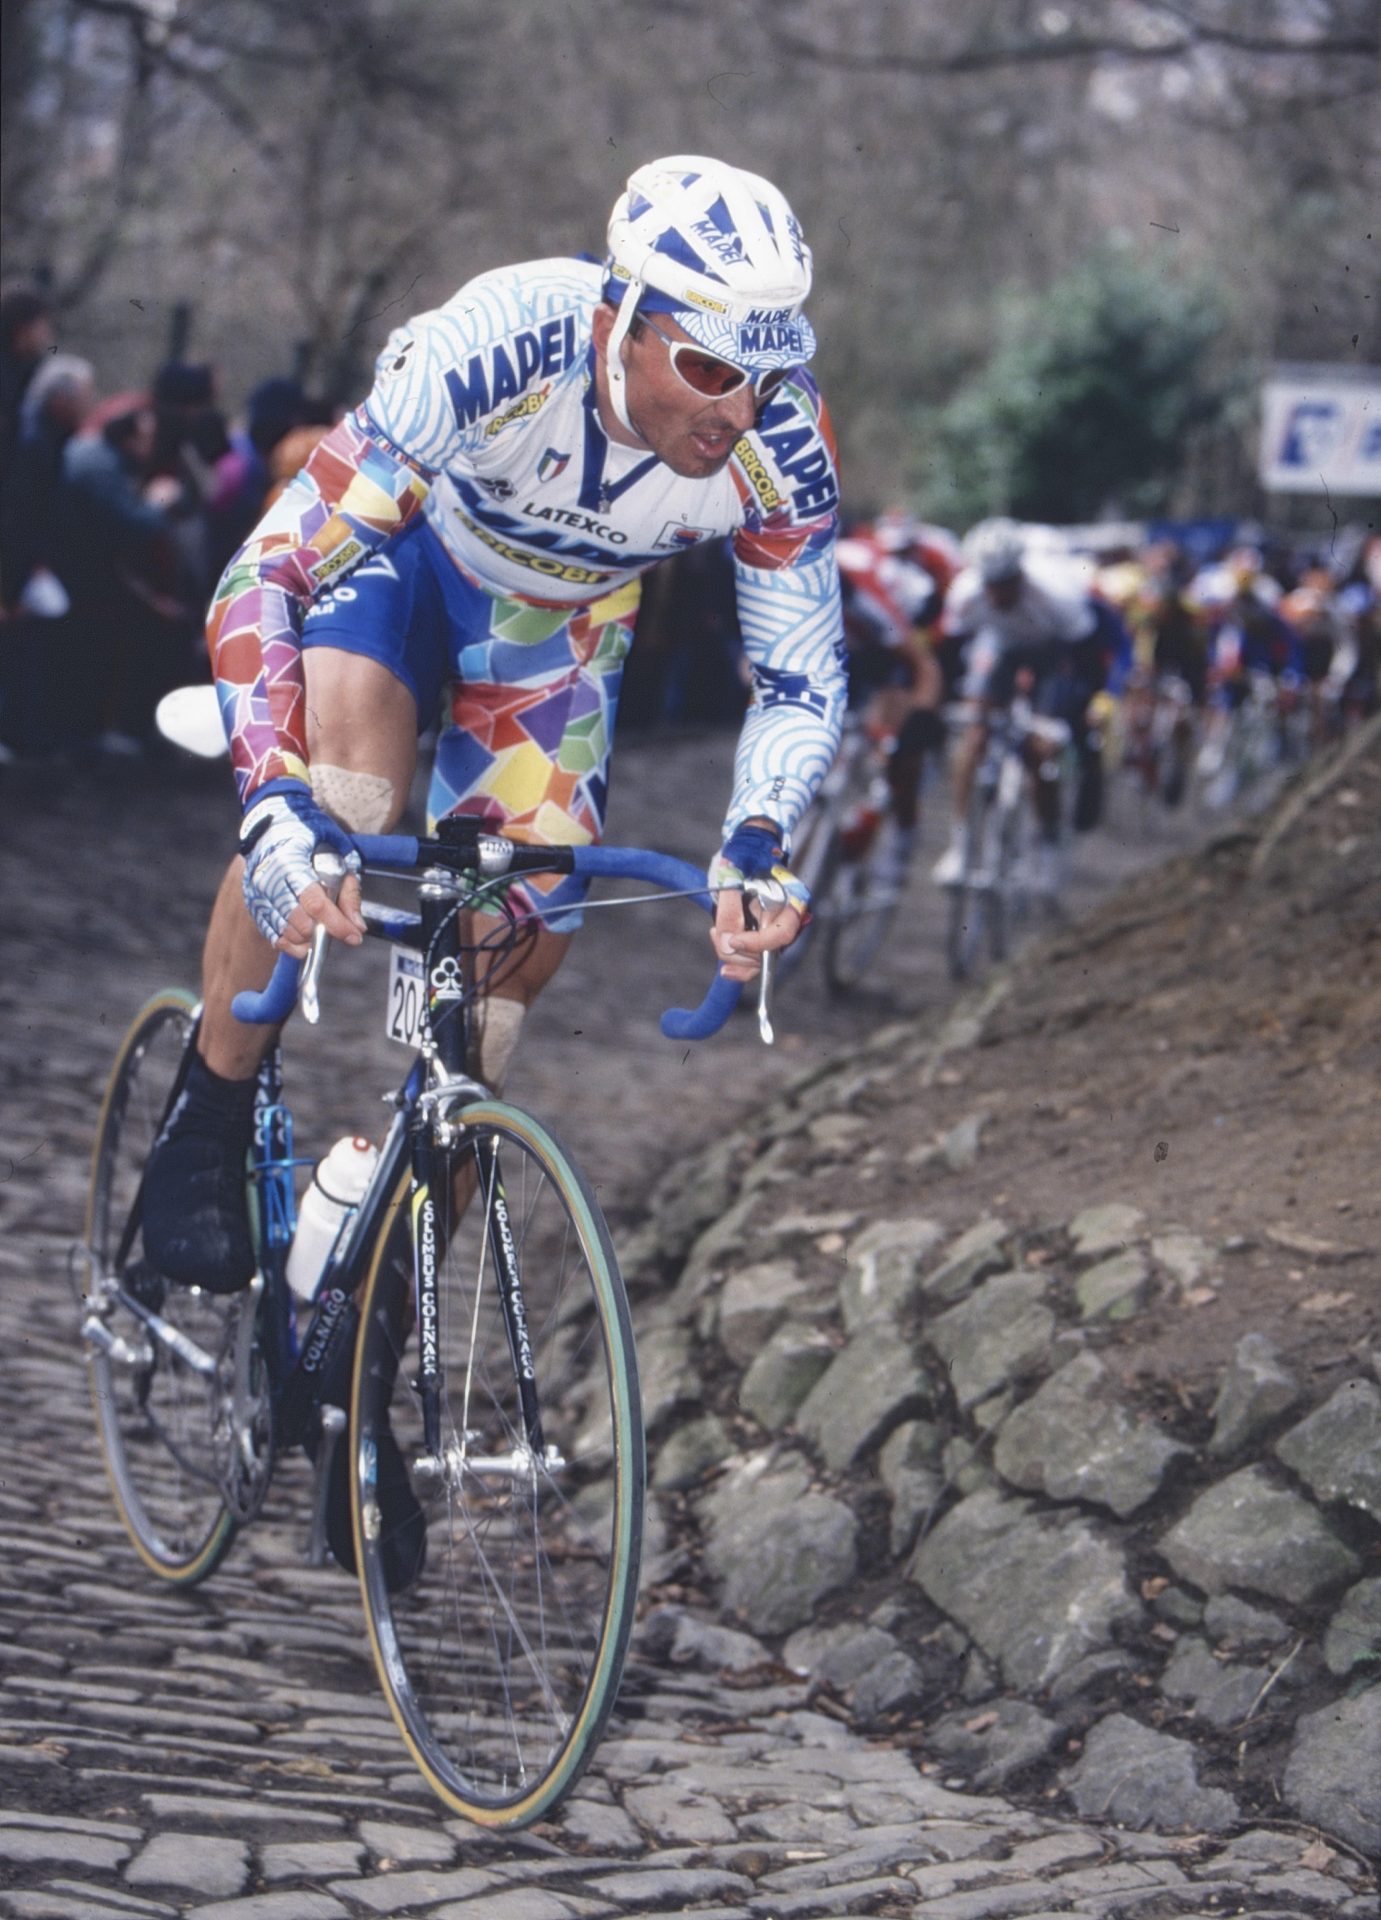 Johan Museeuw races up a berg in an edition of the Tour of Flanders. He's wearing the unmistakable multi-colored "cube" kit of Mapei as he attacks out of the saddle.